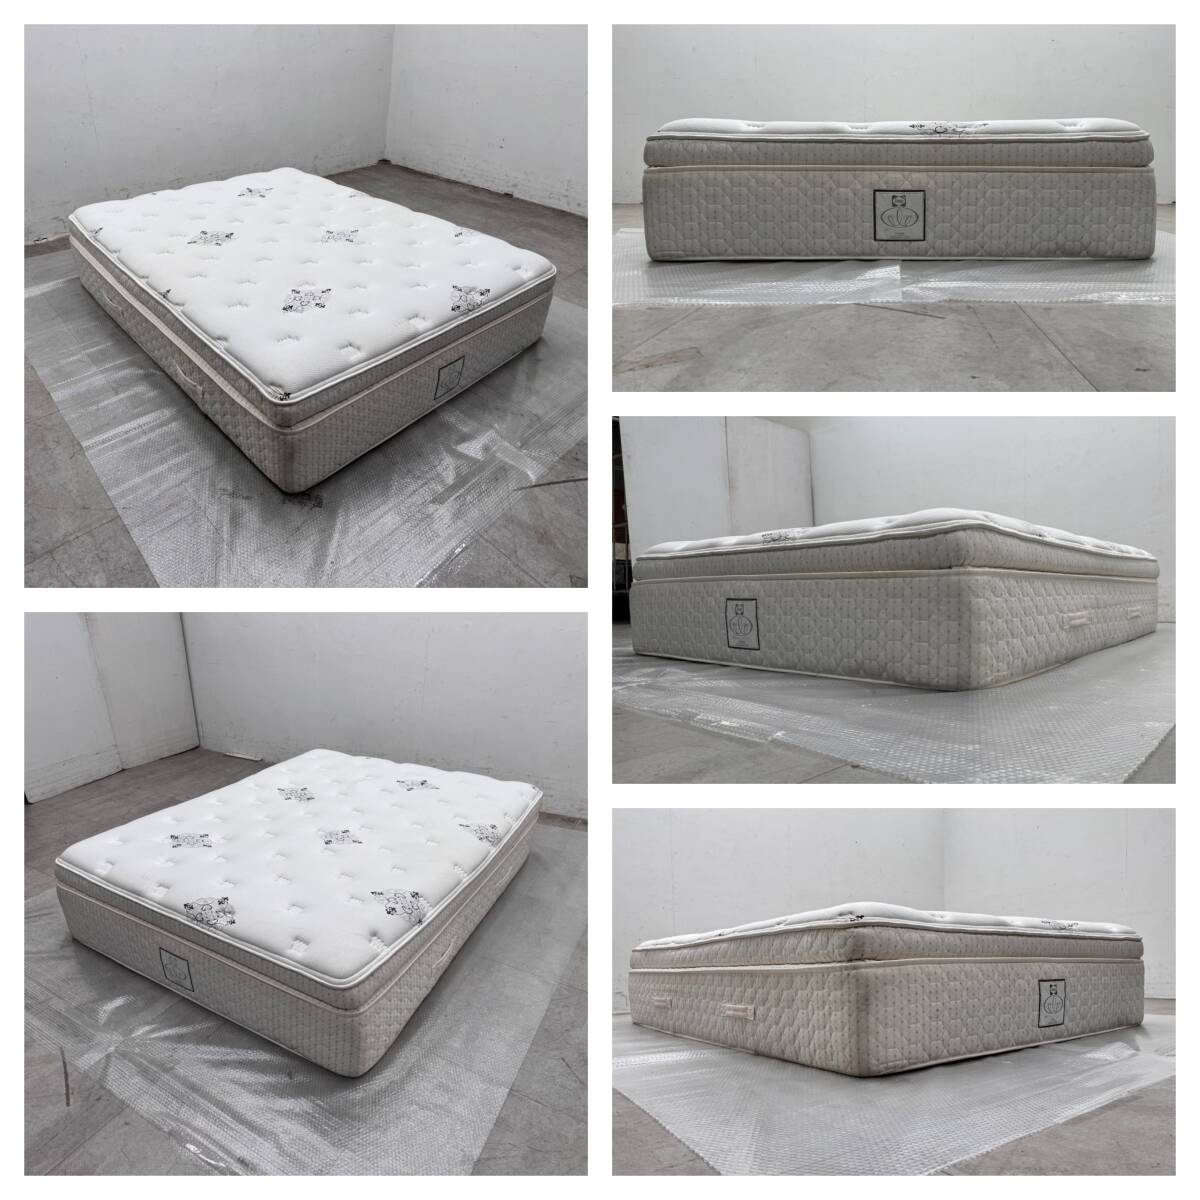 T5115* exhibition ultimate beautiful goods *si- Lee *CROWN JEWEL*Gahnite* top class * wide double mattress 